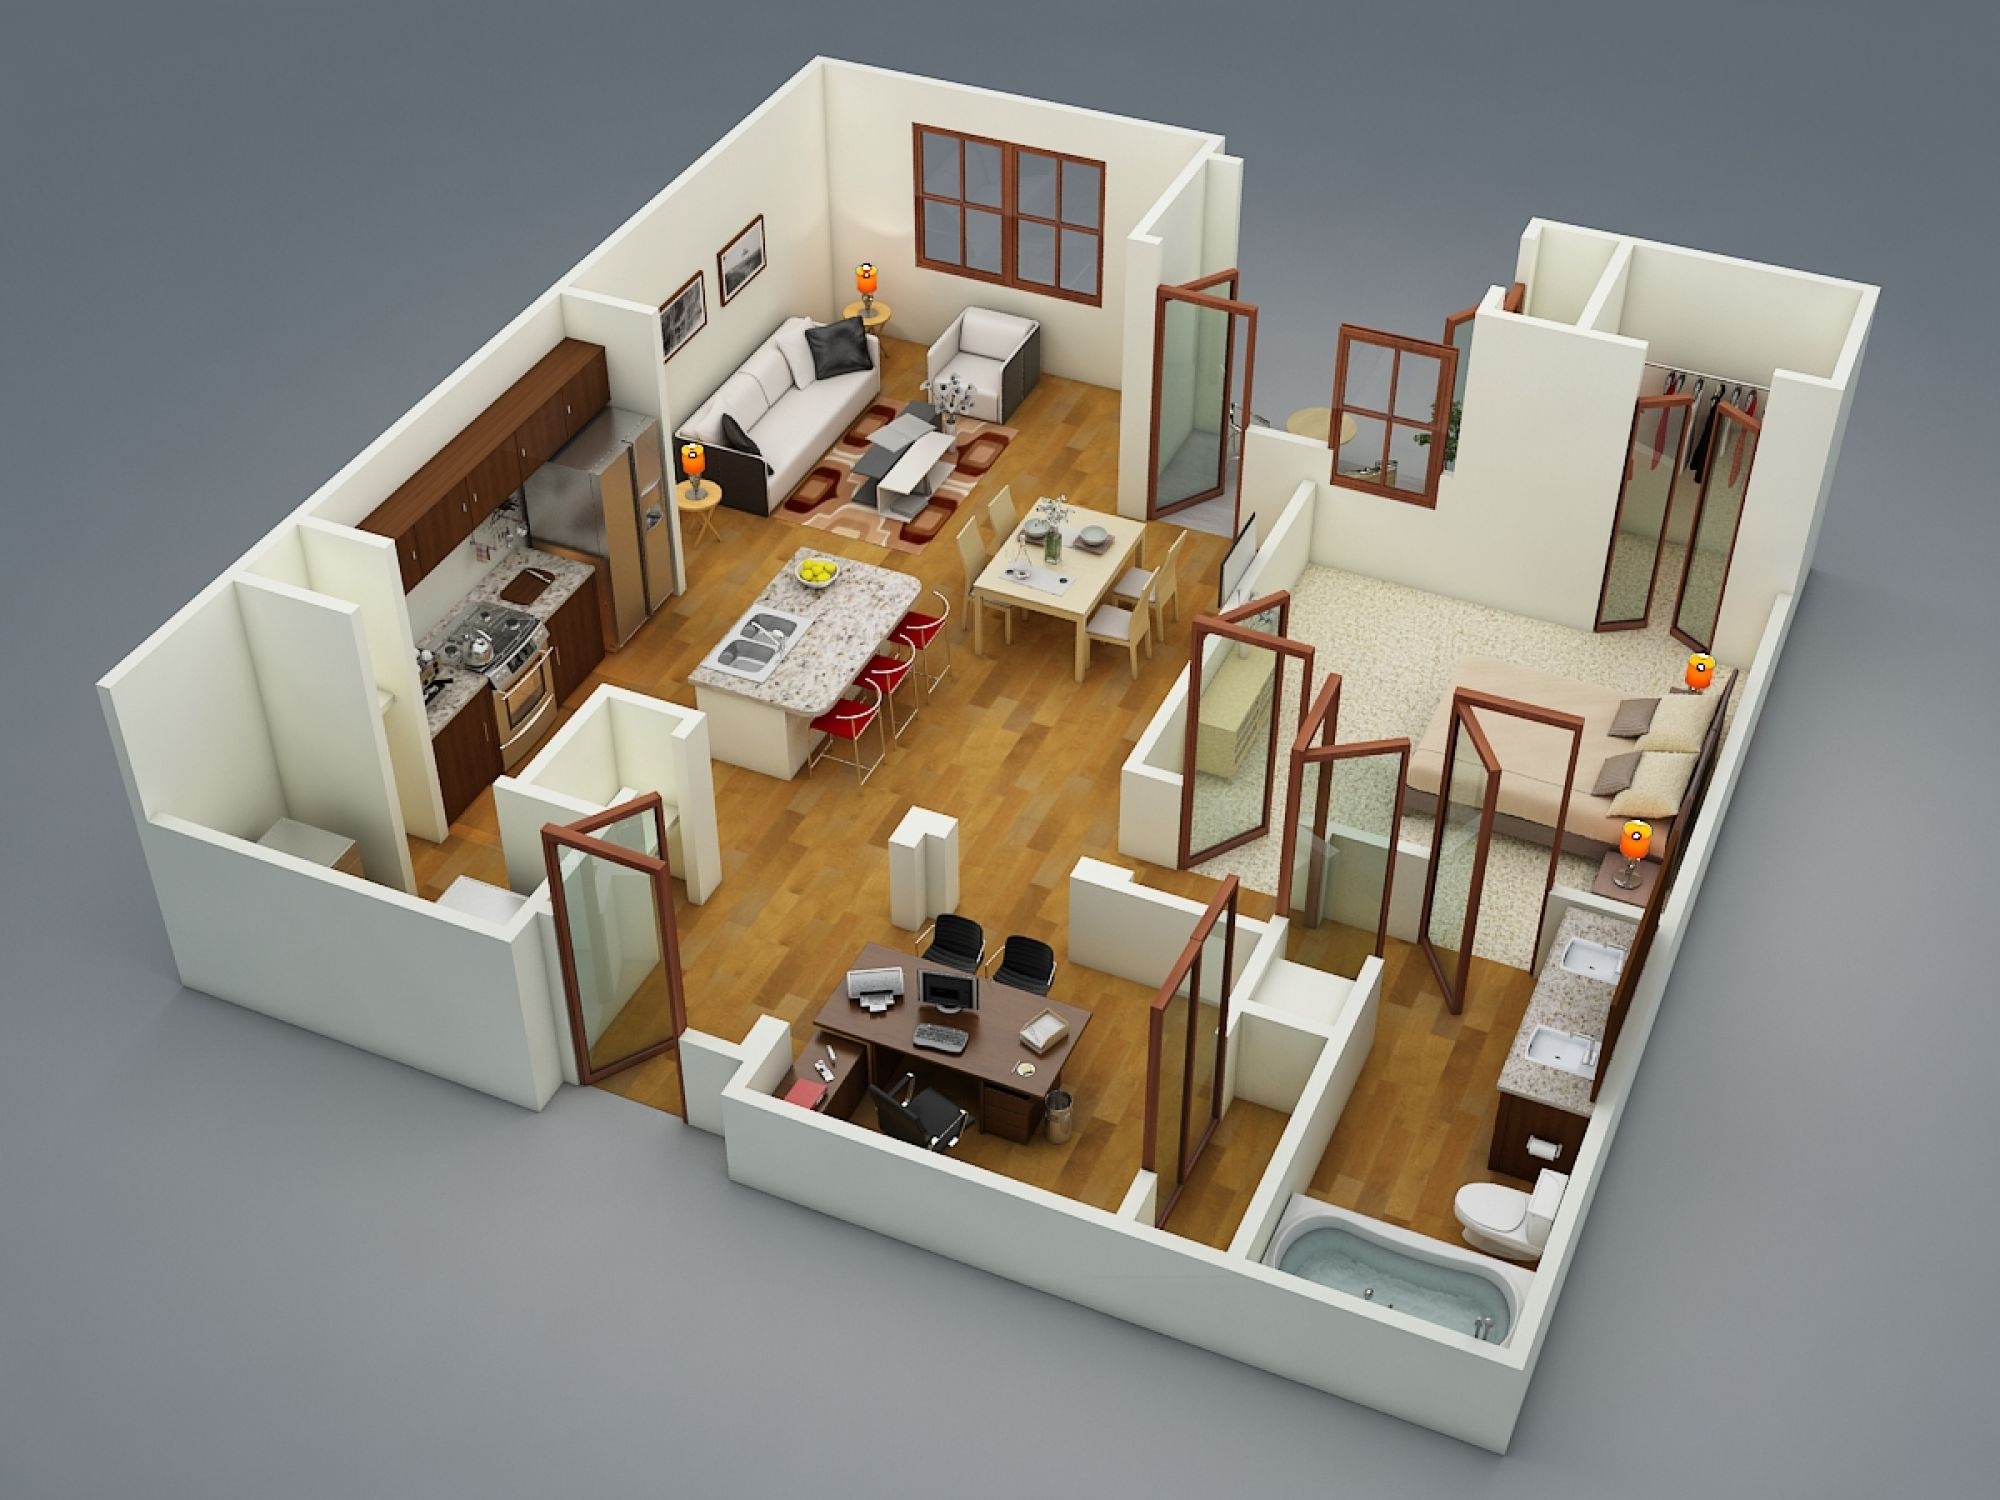  1  Bedroom  Apartment House  Plans 